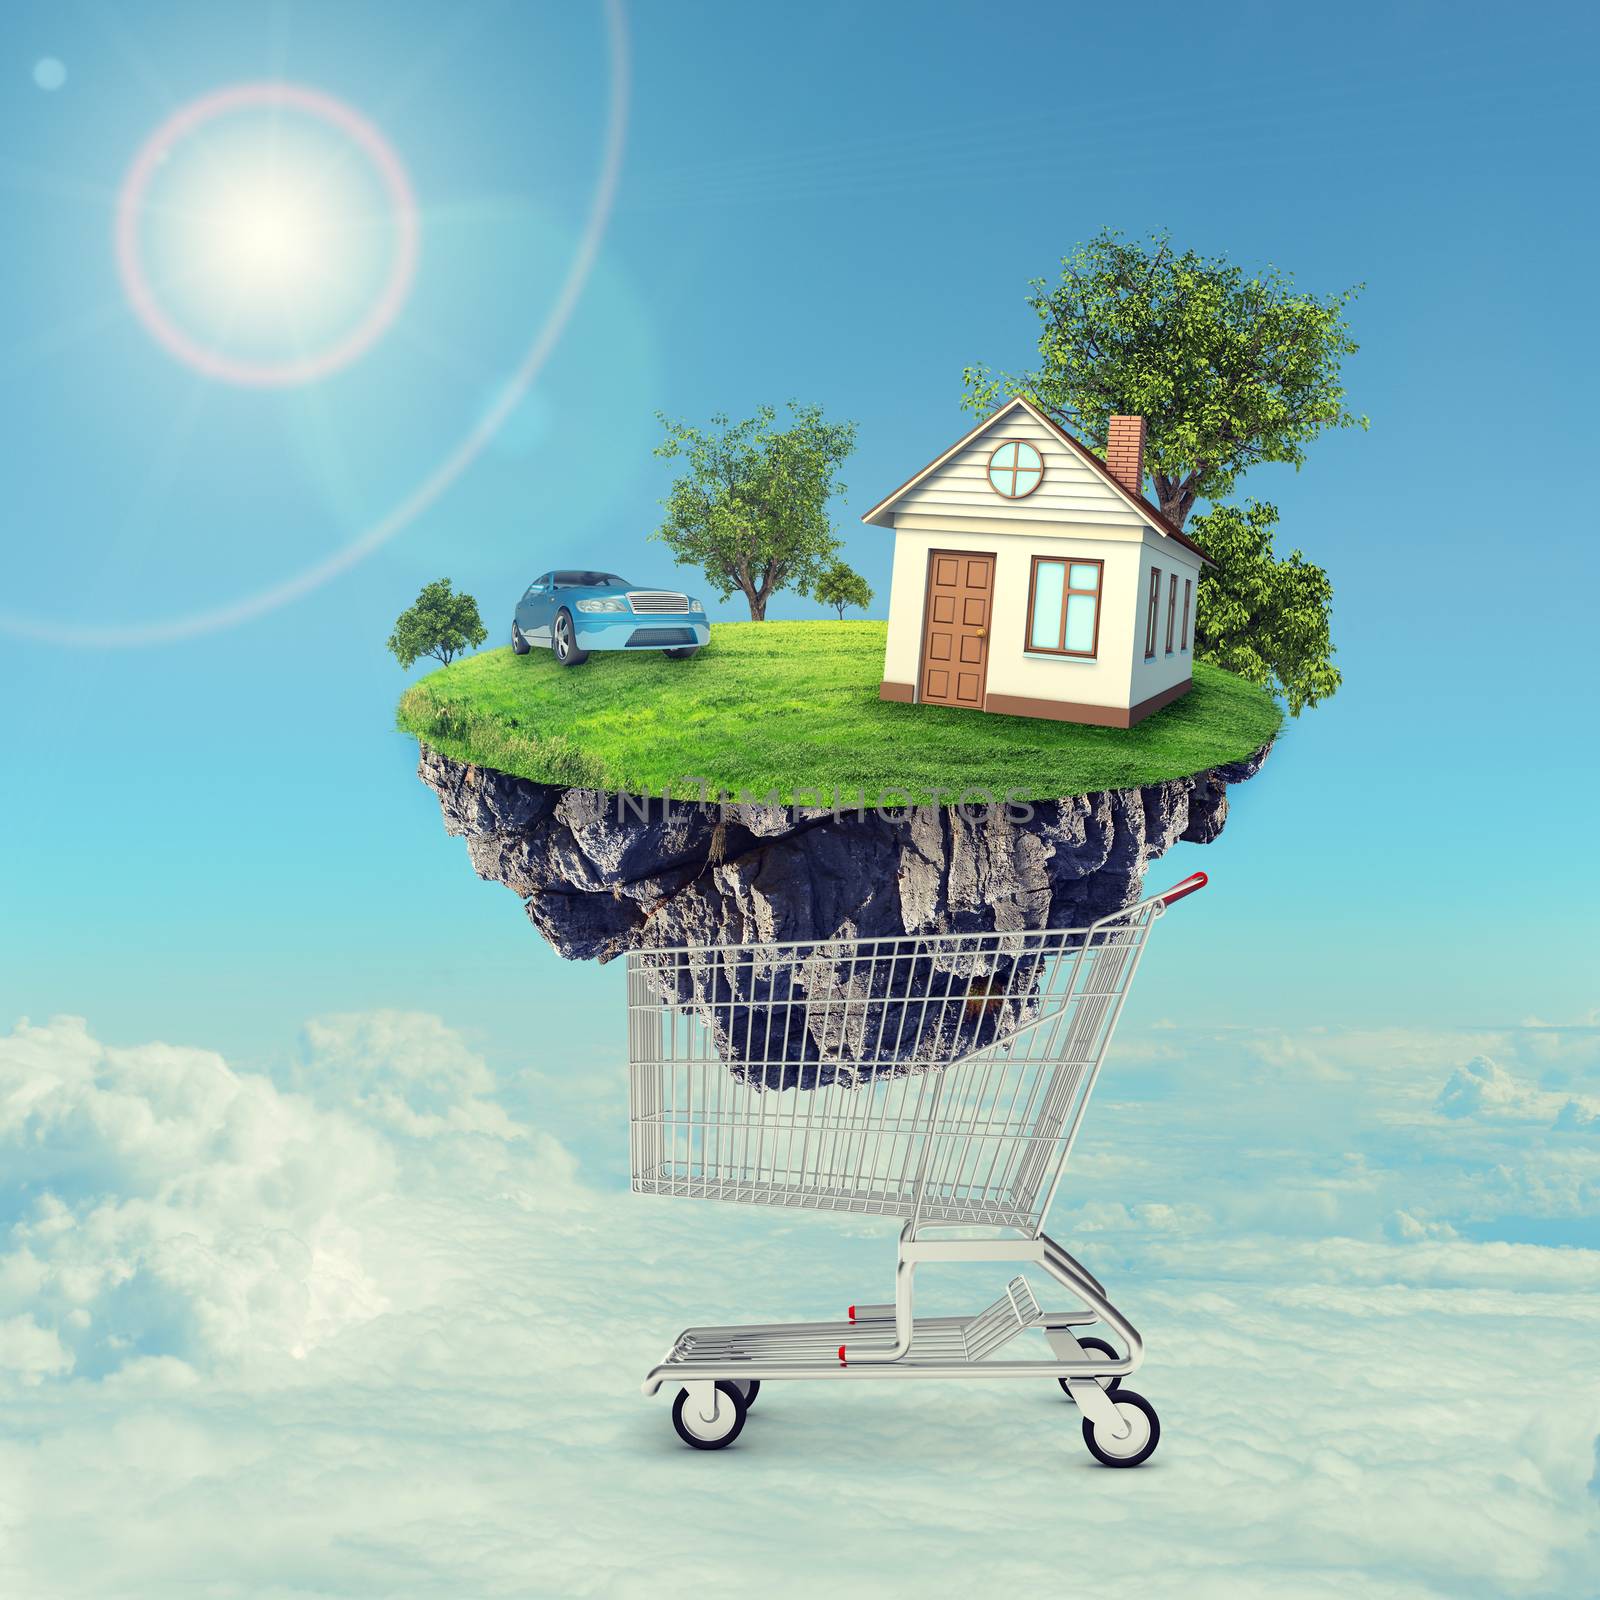 House and car on island in shopping cart by cherezoff